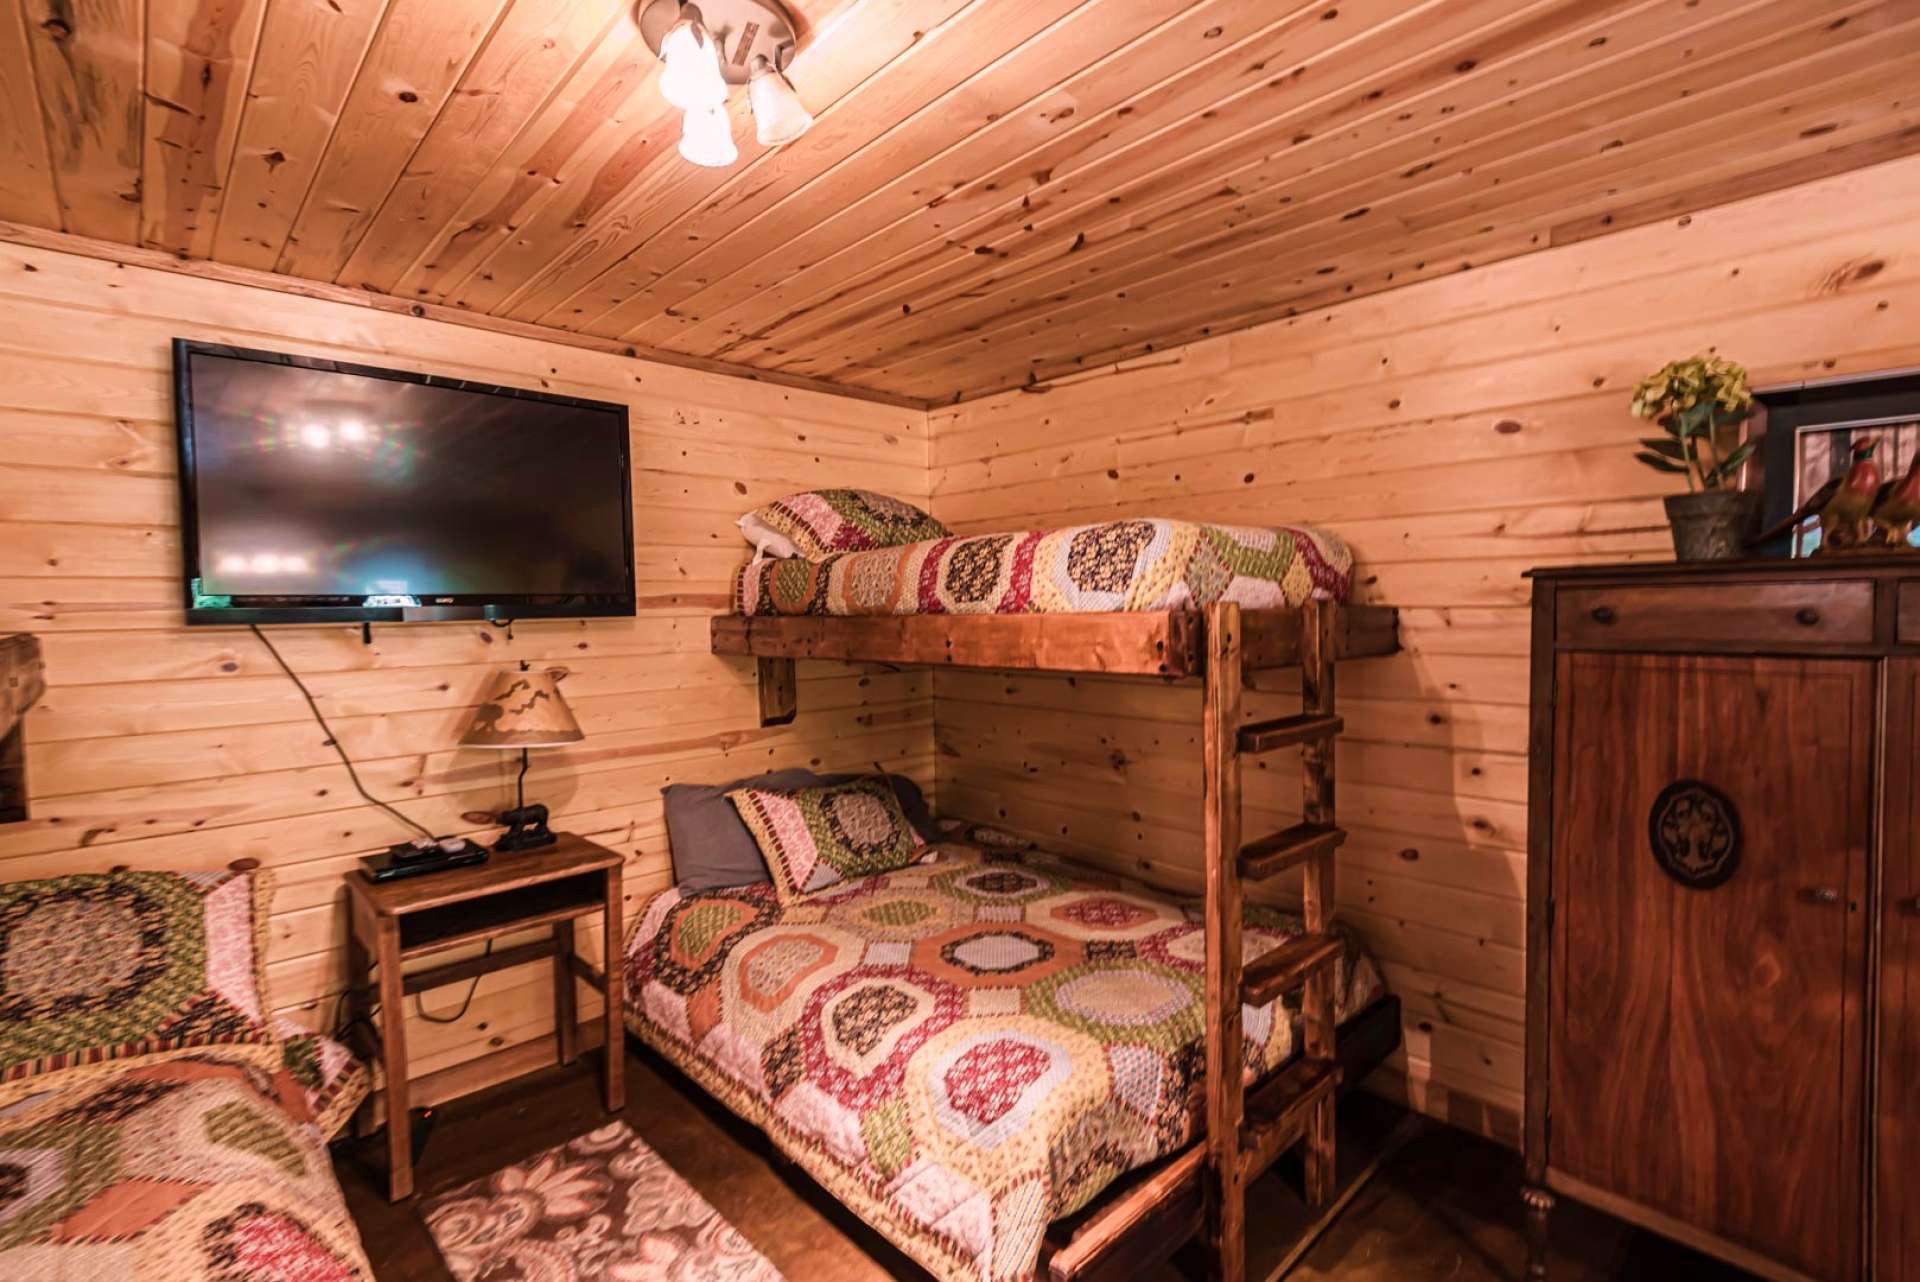 The current owners use this property as a vacation rental, so this level has two full size built-in beds, two twin size built-in beds, as well as a queen size free standing bed creating plentiful sleeping space.